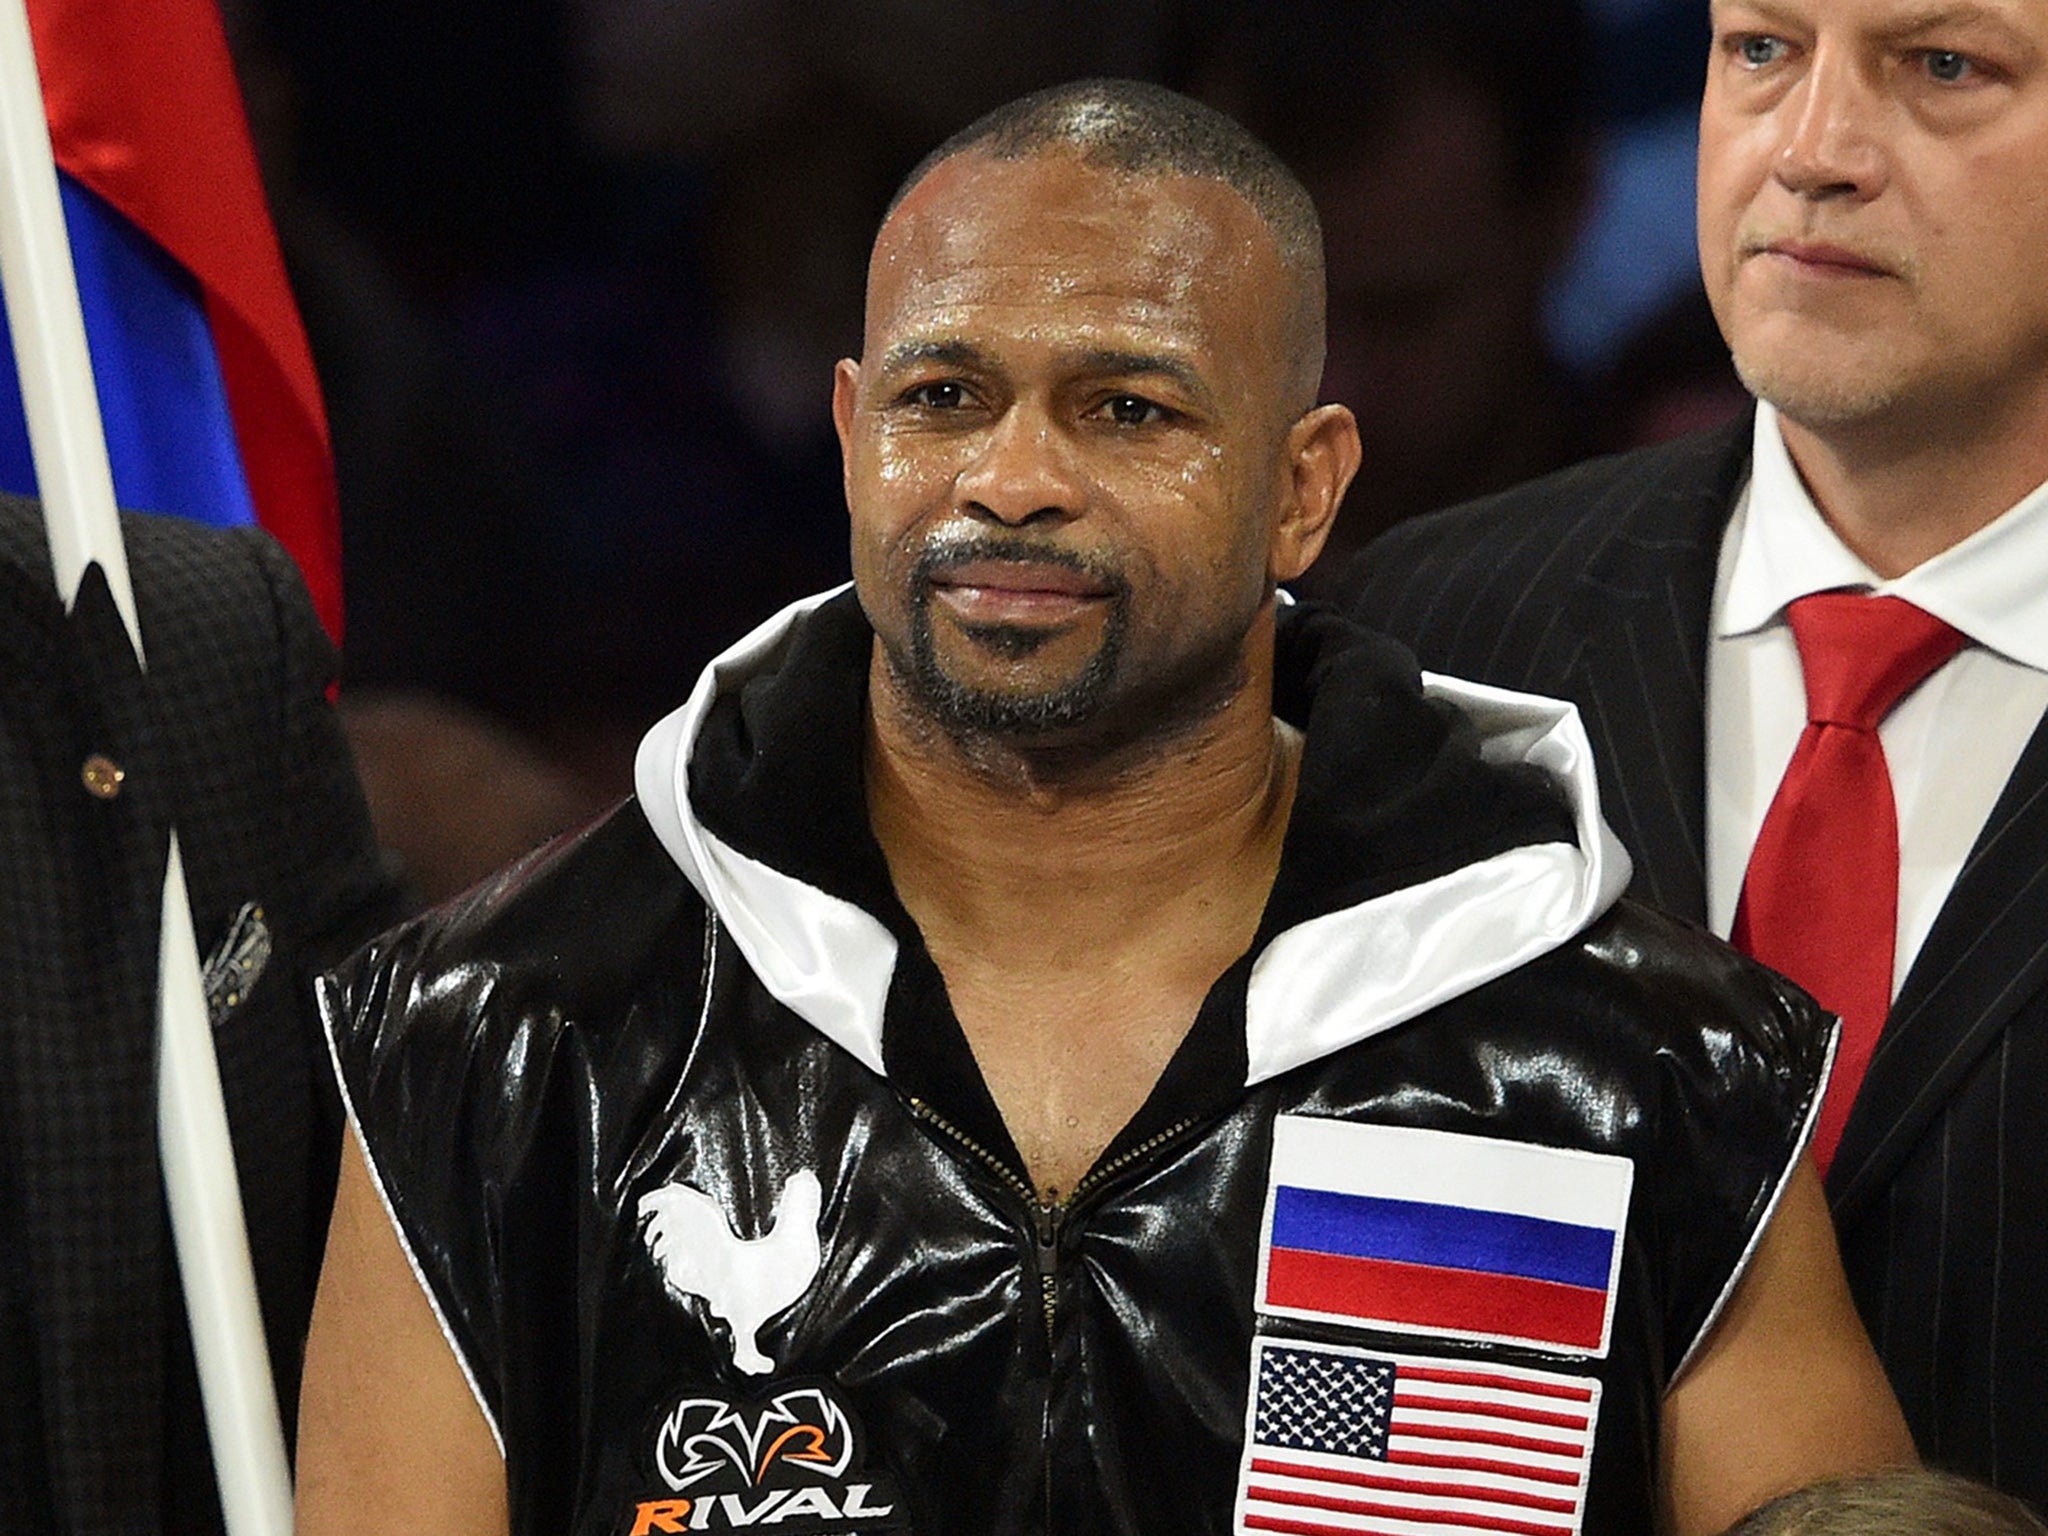 Roy Jones Jr prior to his knockout defeat against Enzo Maccarinelli